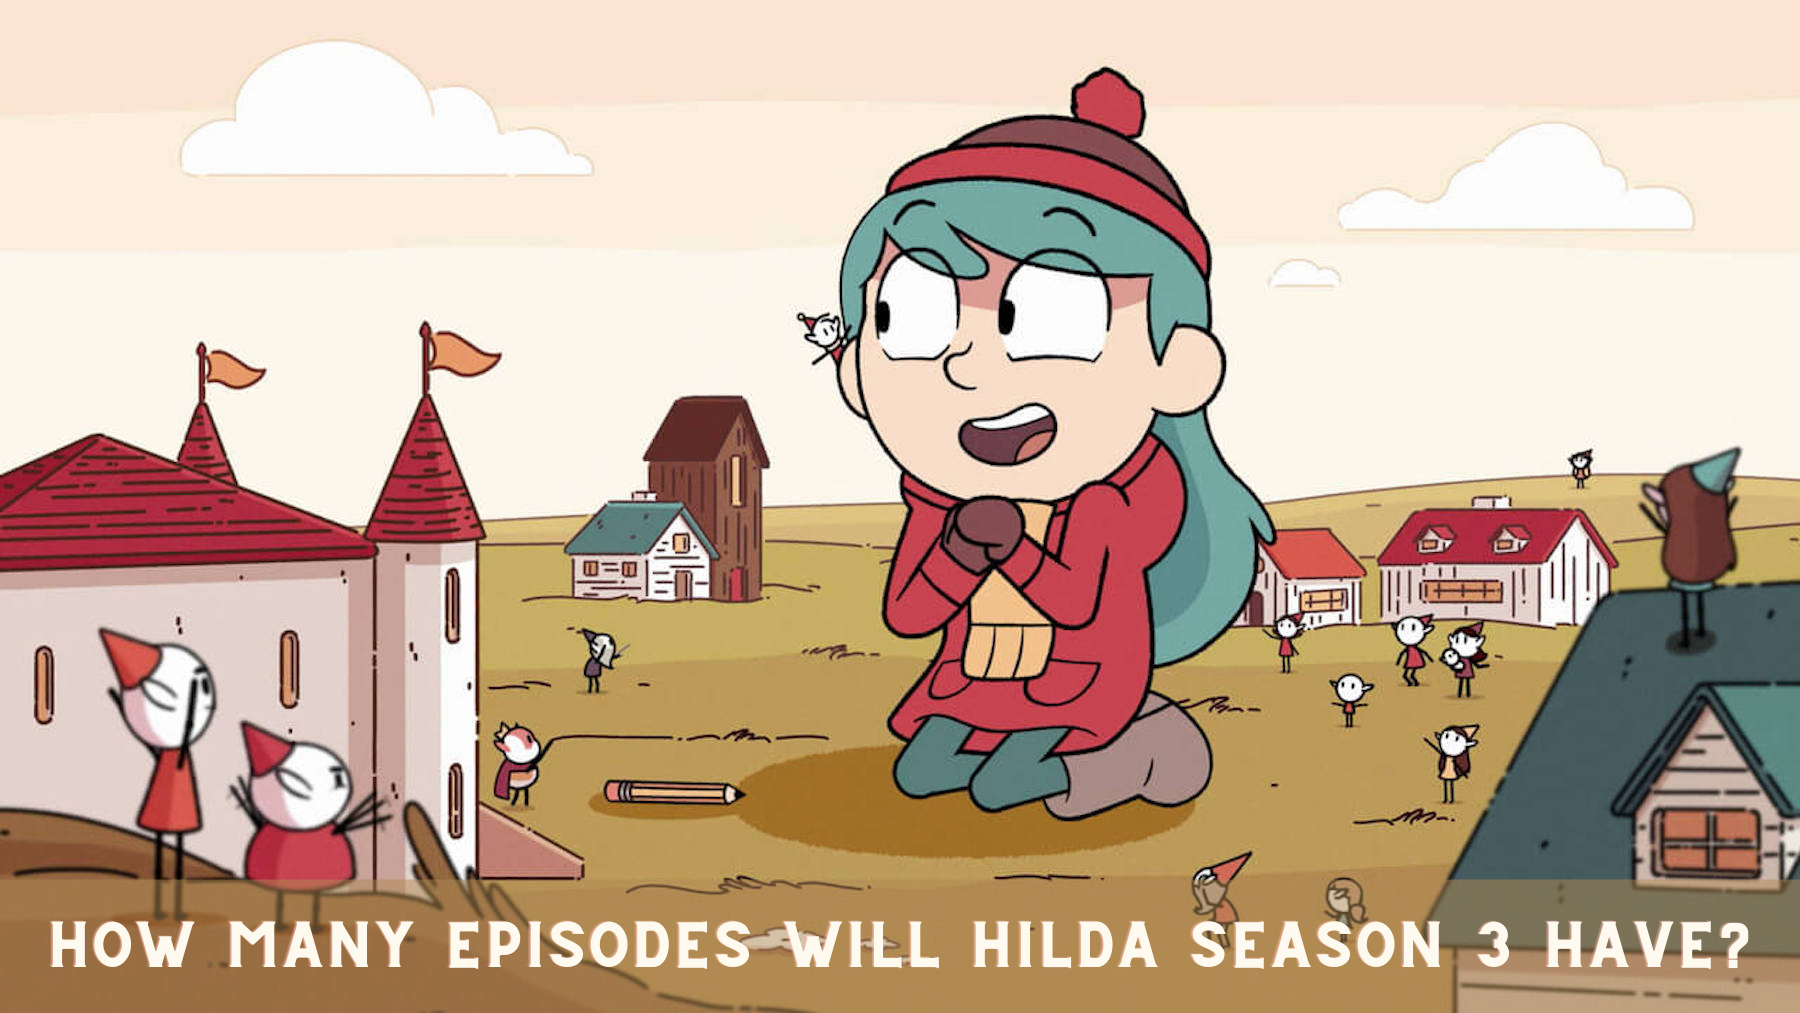 How Many Episodes will Hilda Season 3 have?